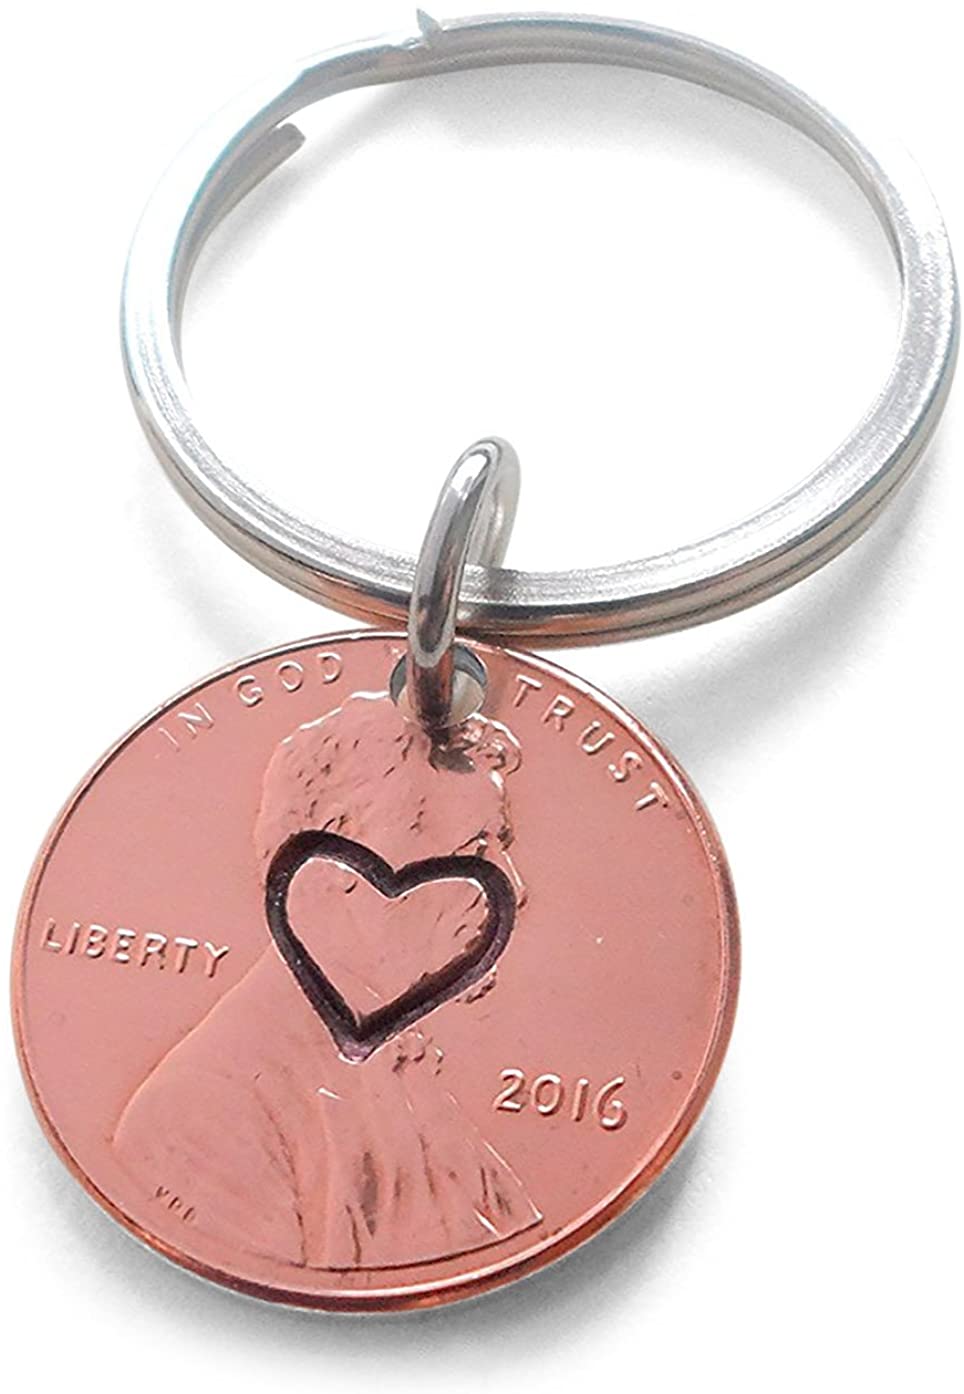 Centered Heart Stamped on 2016 Penny Keychain; 8 Year Anniversary Gift